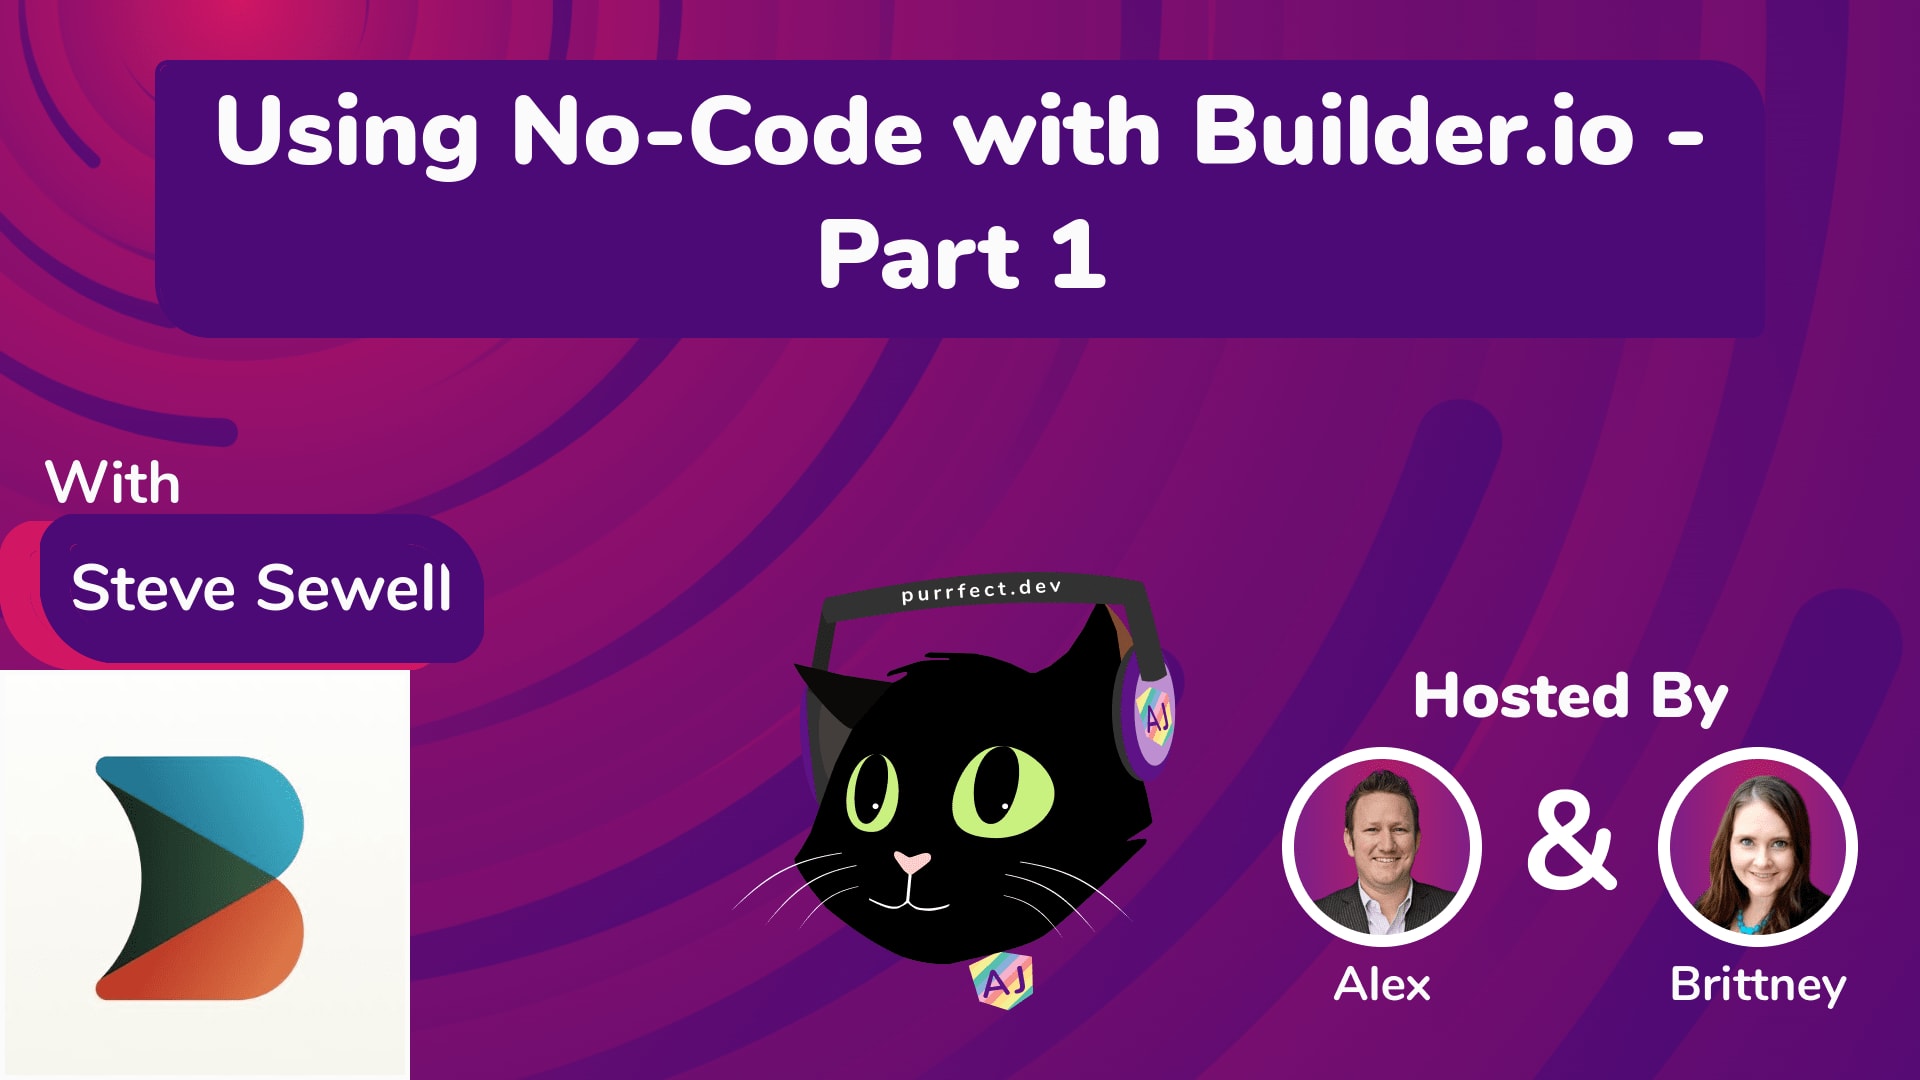 2.1 - Using No-Code with Builder - Part 1